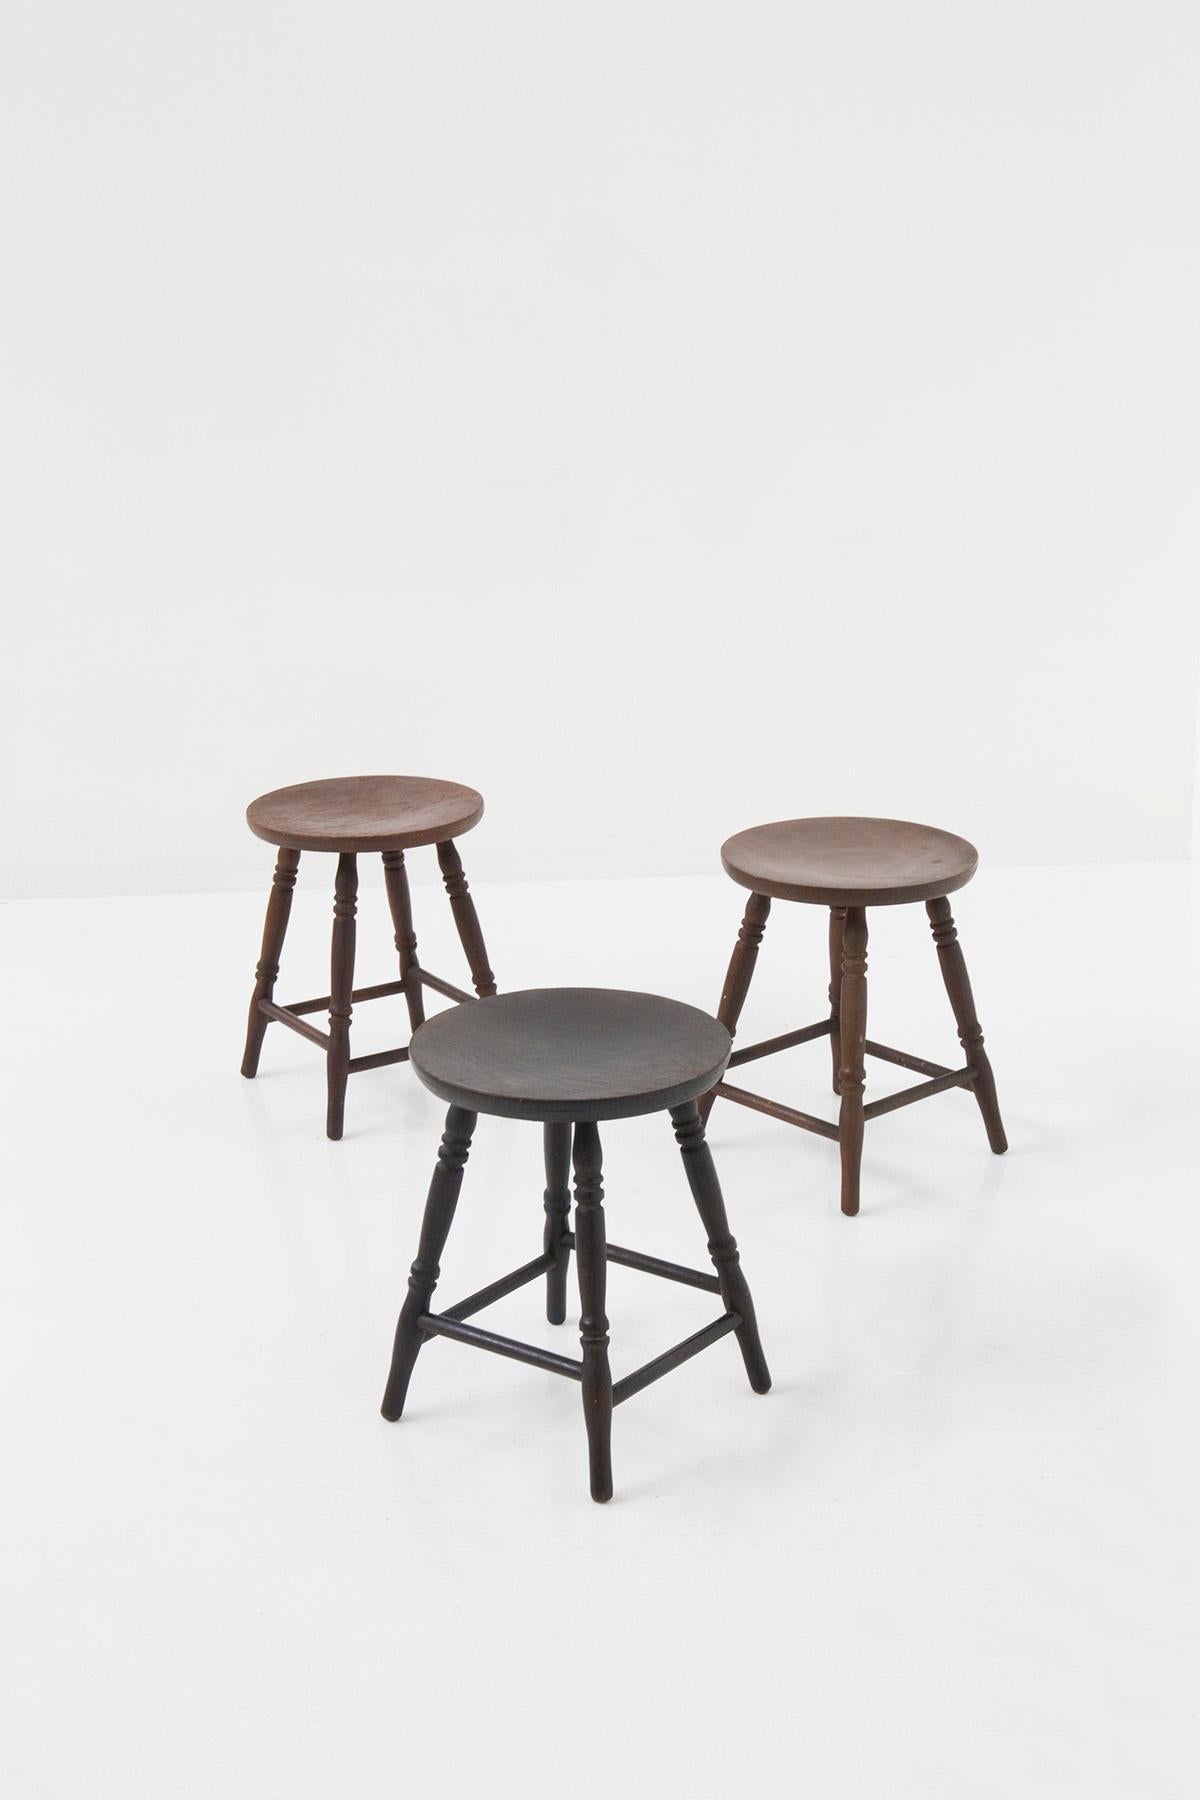 In the silence of bygone times, a trio of timeless treasures has emerged, whispering stories of a bygone era: welcome to the enchanting world of vintage IKEA stools, affectionately known as the EDWARD model. As if frozen in the amber of time, these